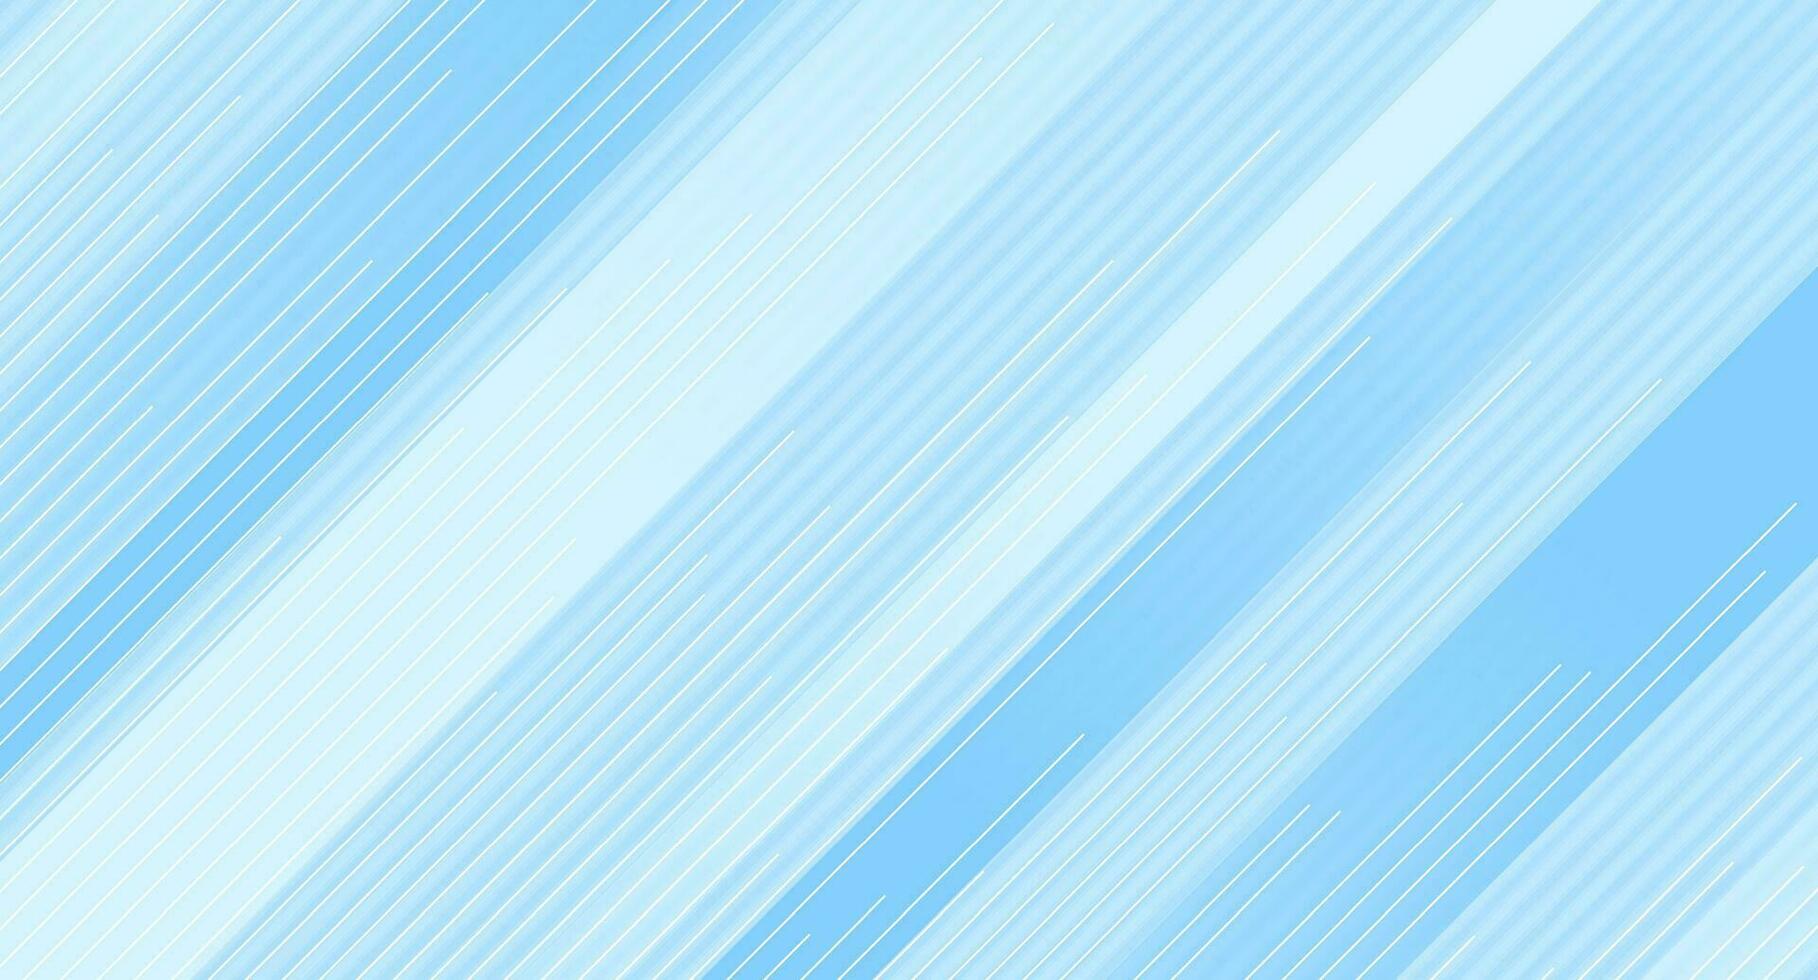 Blue white minimal lines and stripes abstract background vector